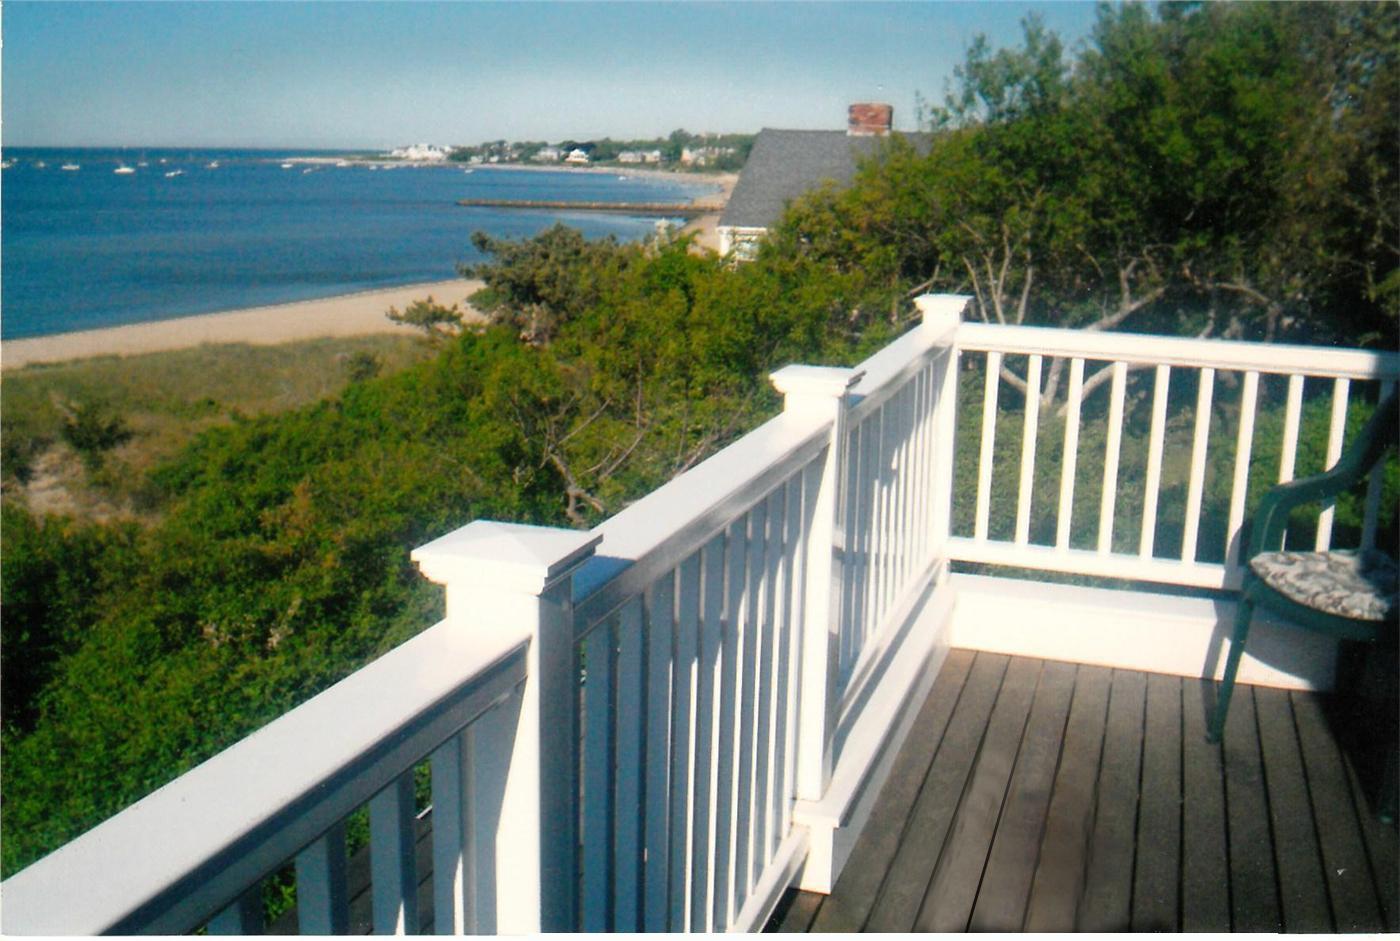 Hyannis Vacation Rental home in Cape Cod MA 02601 Walk 